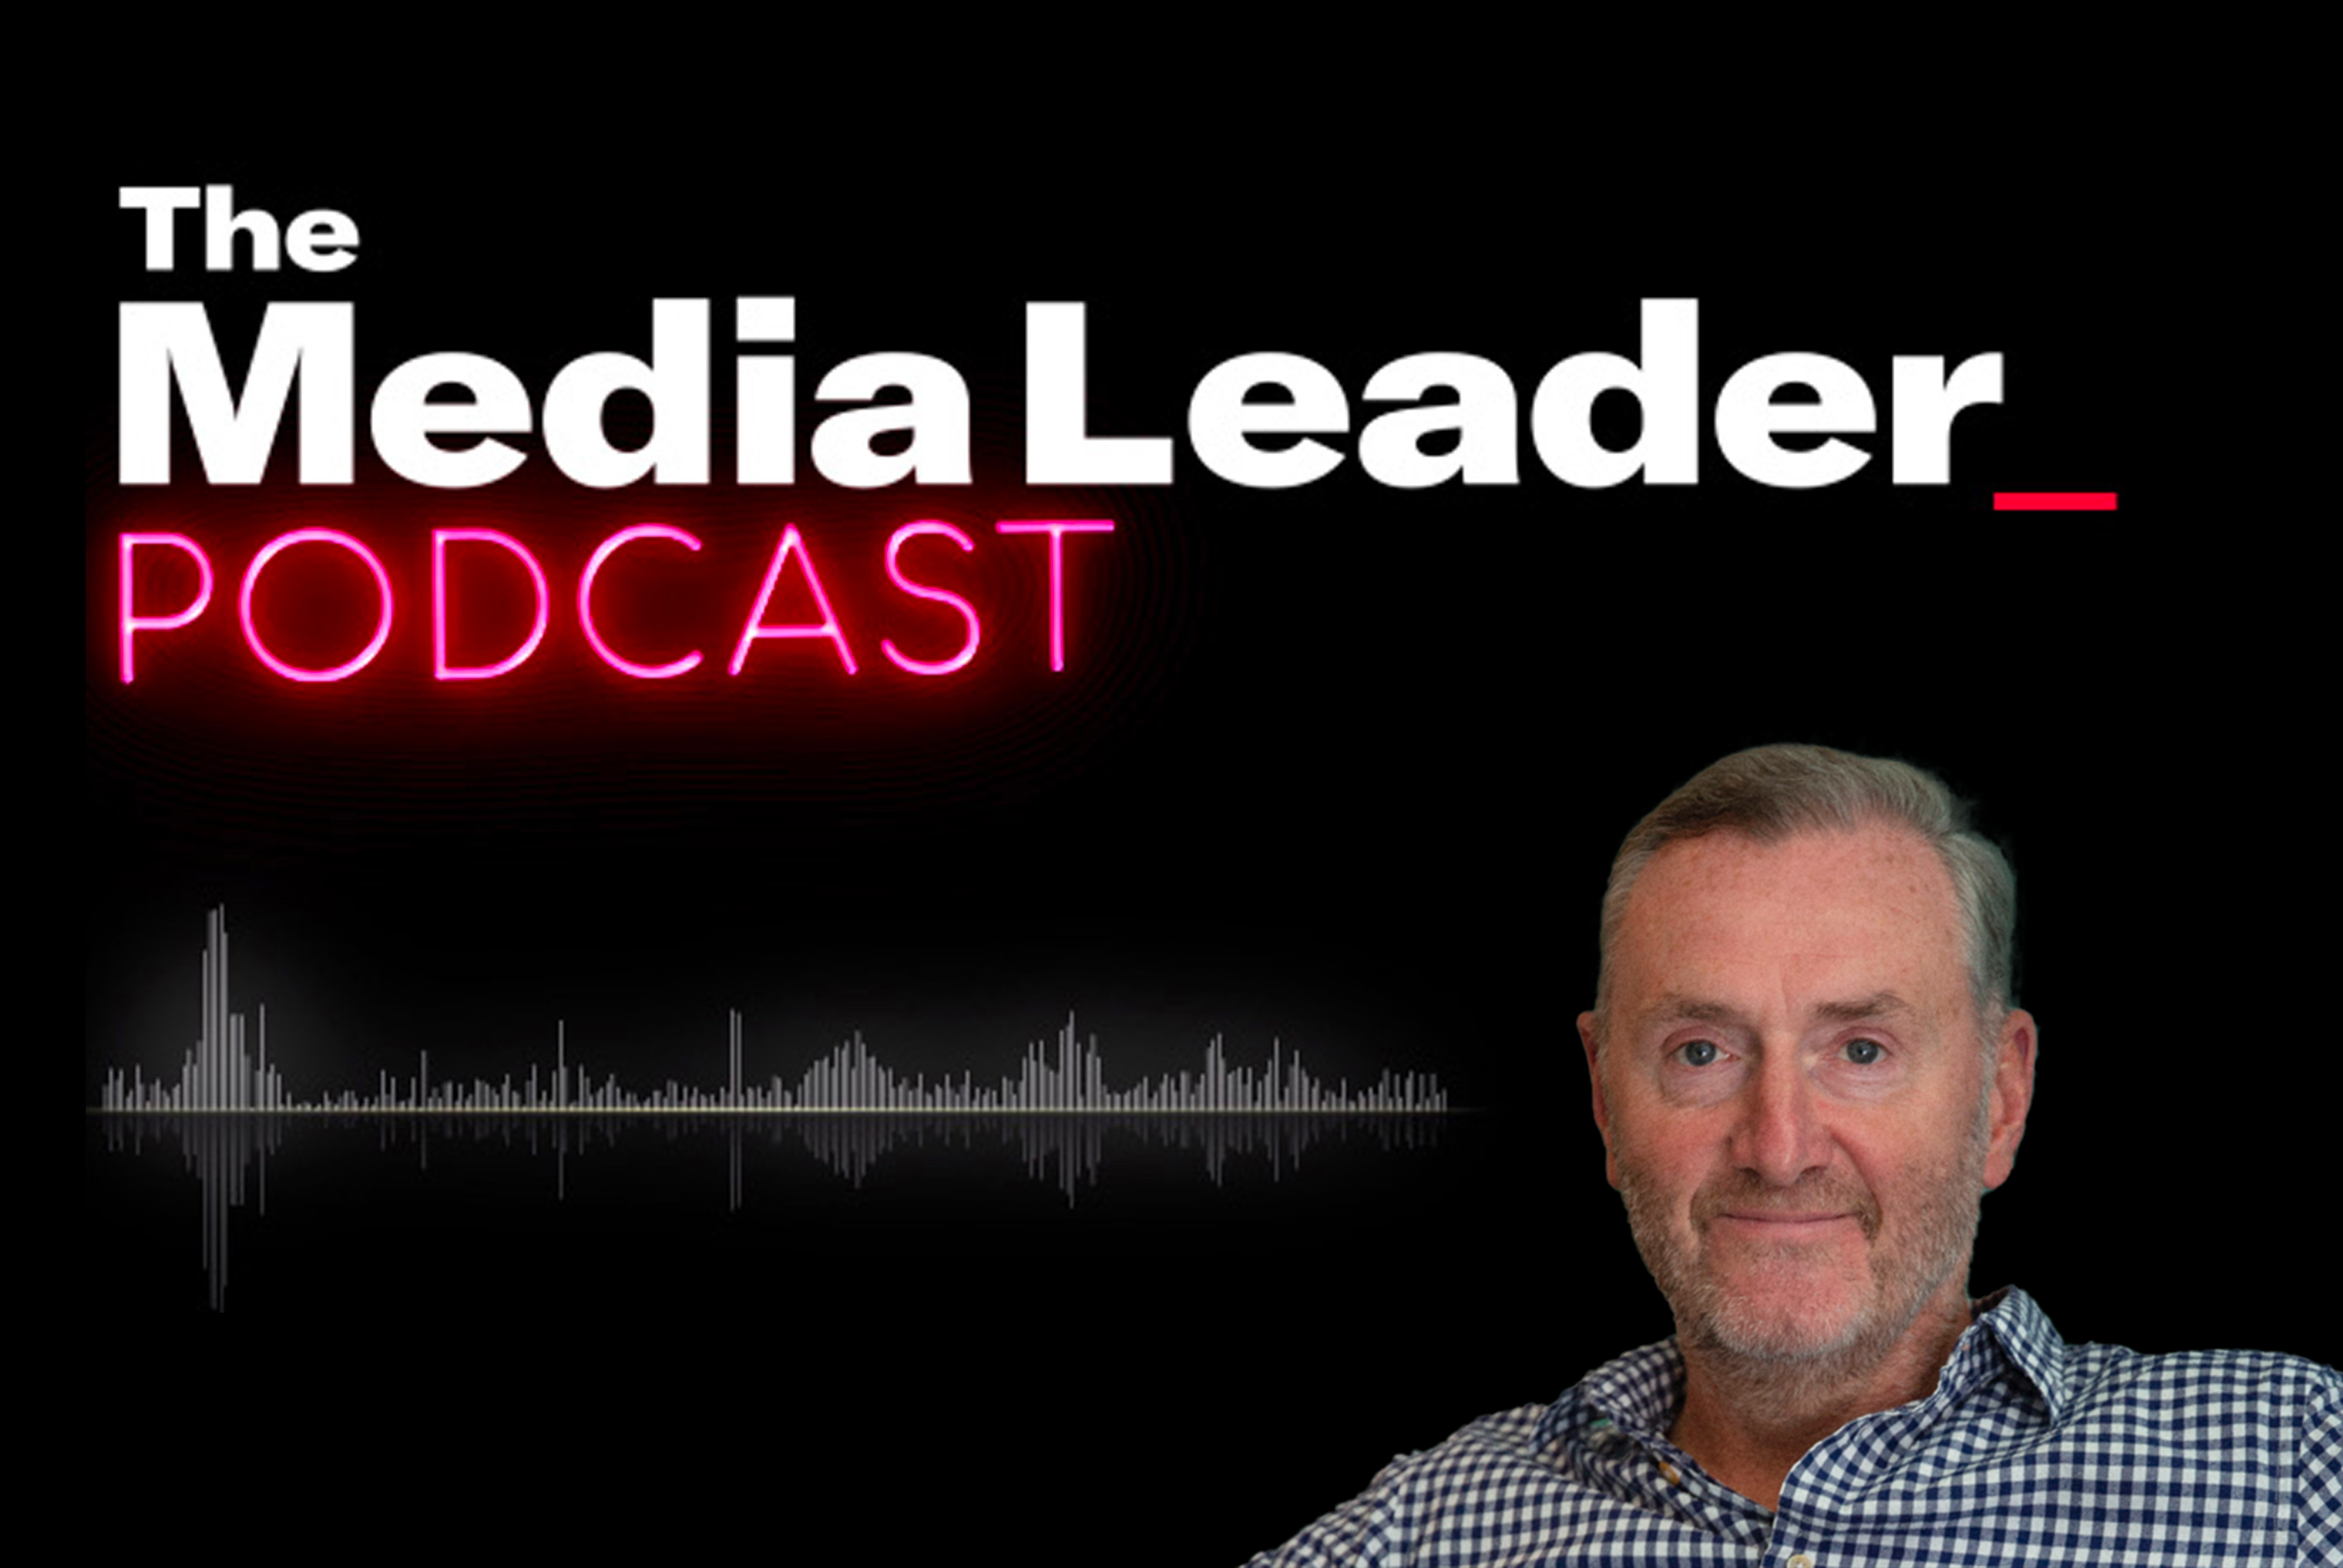 Podcast: Behind the surge in media agency entries in the IPA Effectiveness Awards